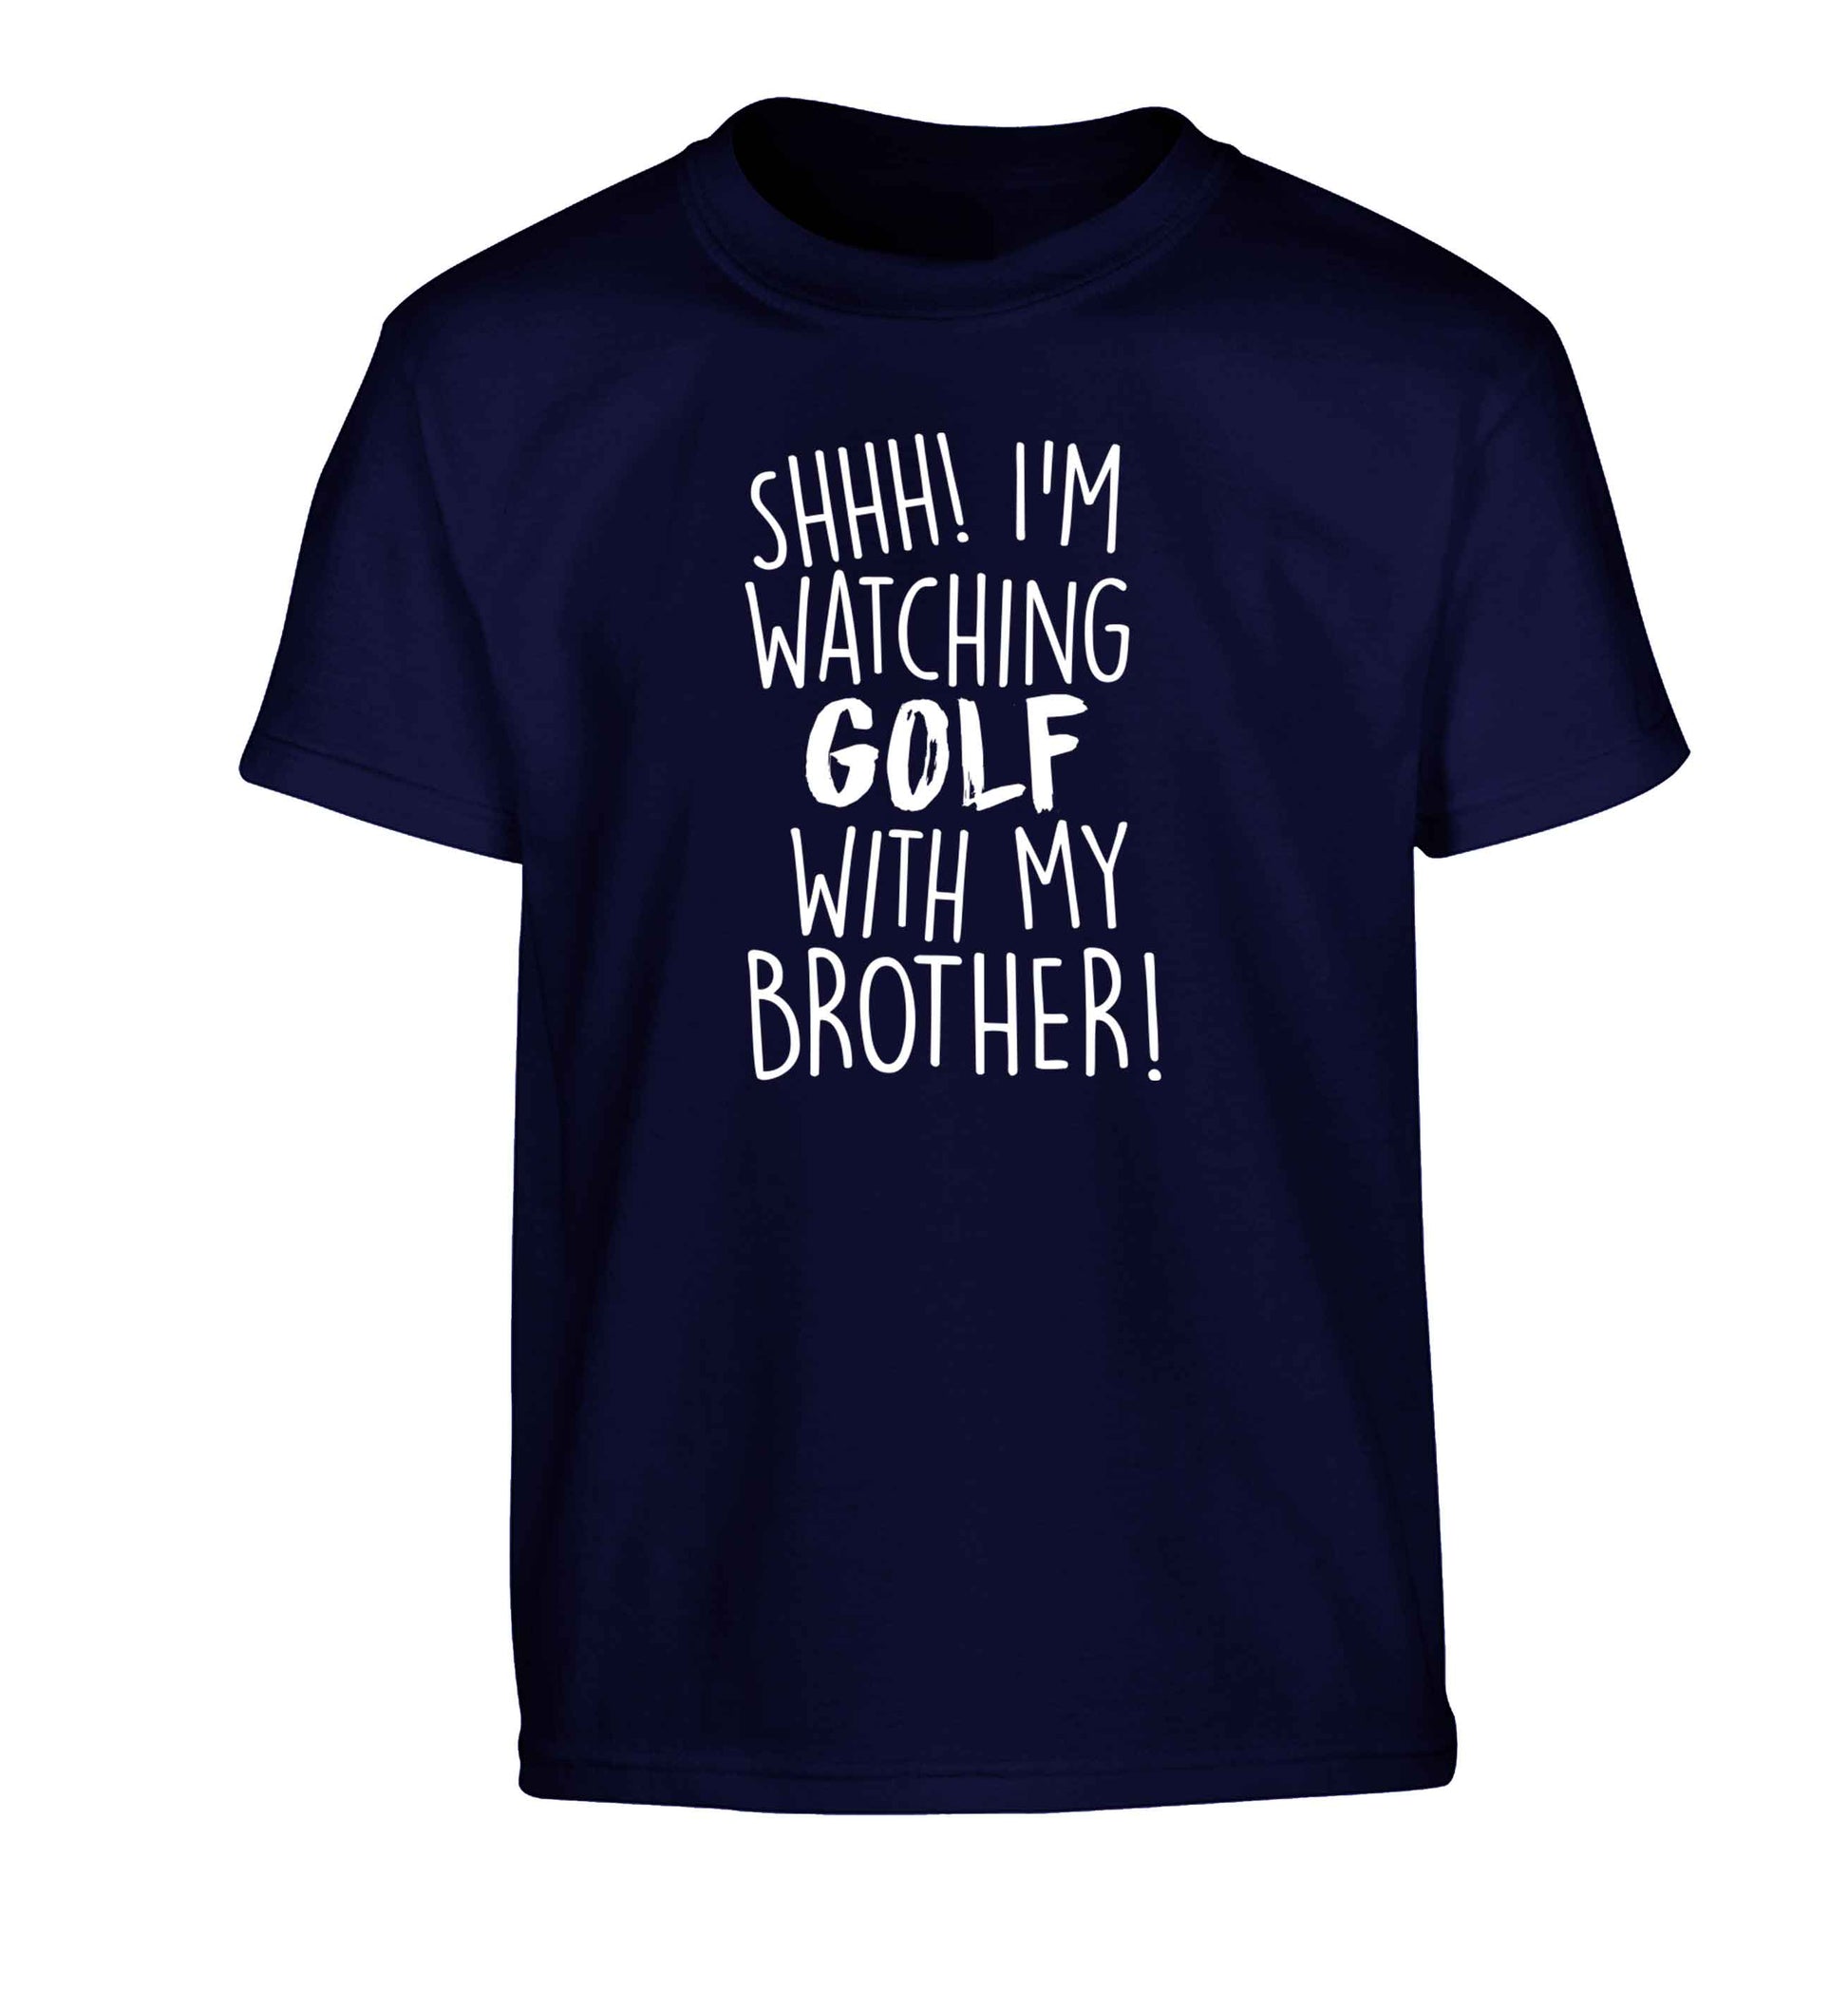 Shh I'm watching golf with my brother Children's navy Tshirt 12-13 Years